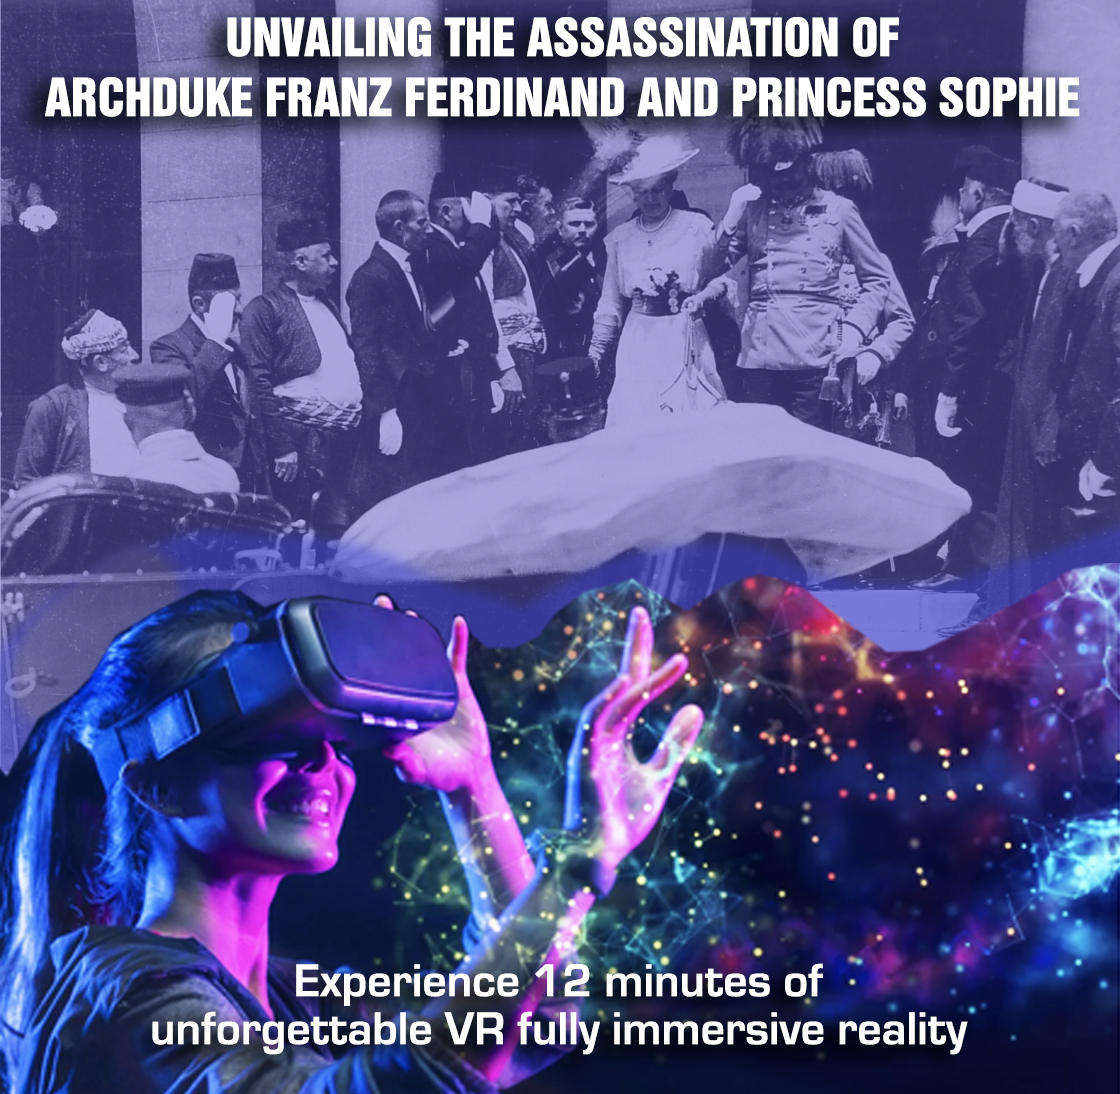 UNVAILING THE ASSASSINATION OF ARCHDUKE FRANZ FERDINAND AND PRINCESS SOPHIE - Experience unforgettable VR immersive reality